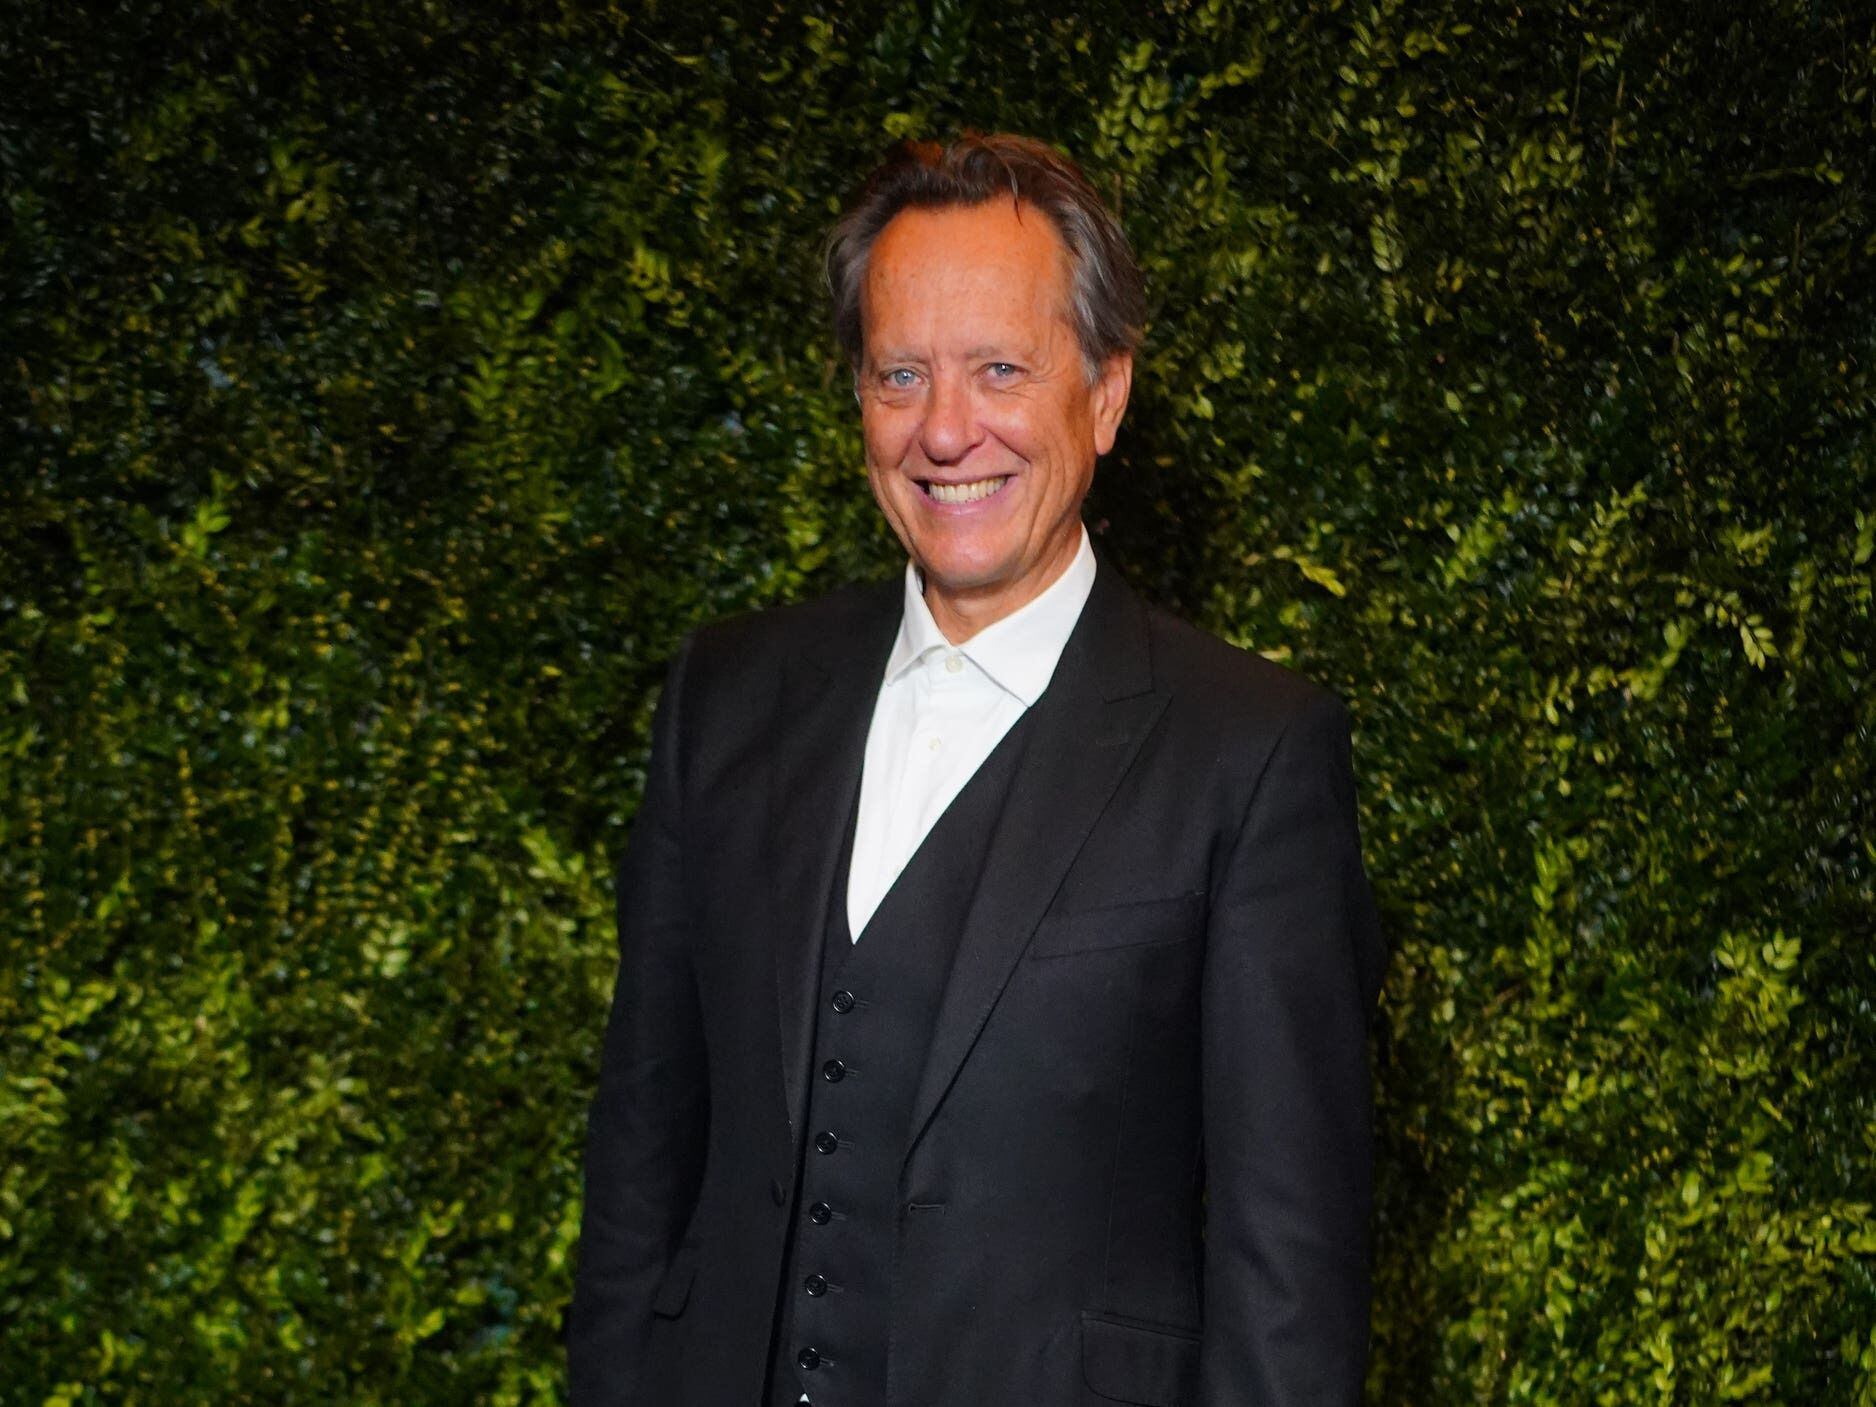 Richard E Grant and Sam Mendes’ film company donates to help mother with cancer